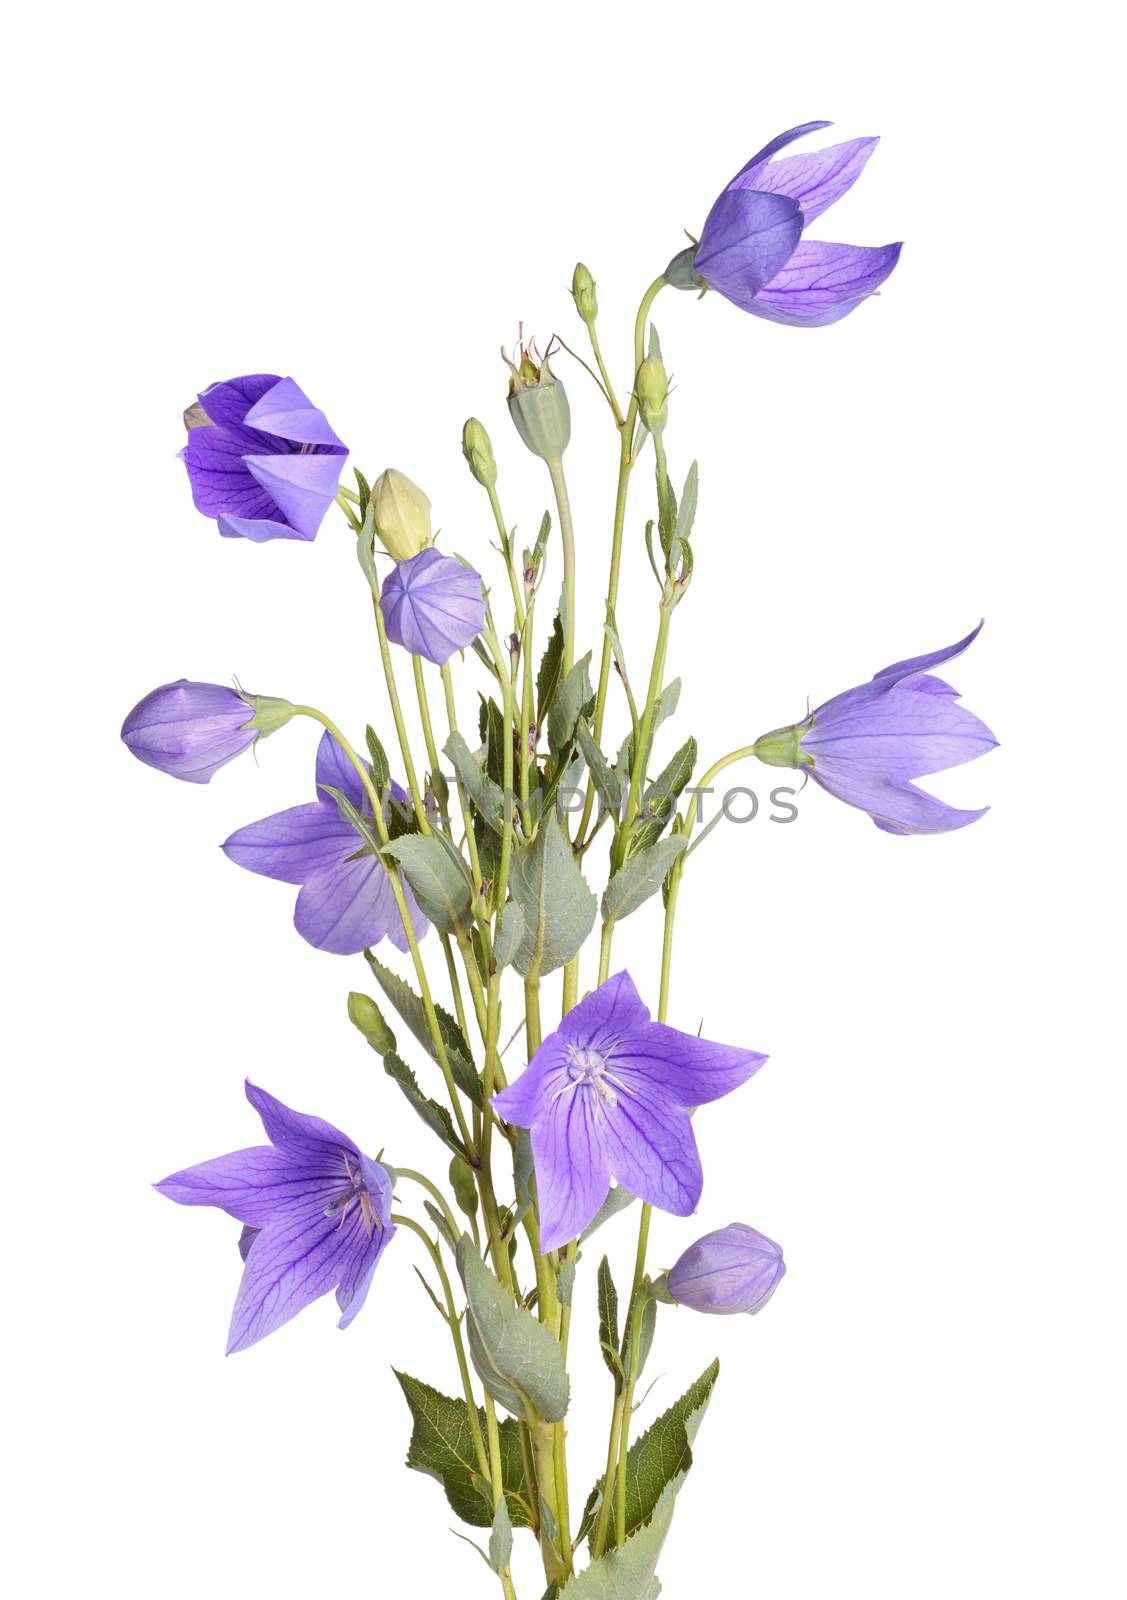 Flowers, buds and leaves of balloon flower on white by sgoodwin4813